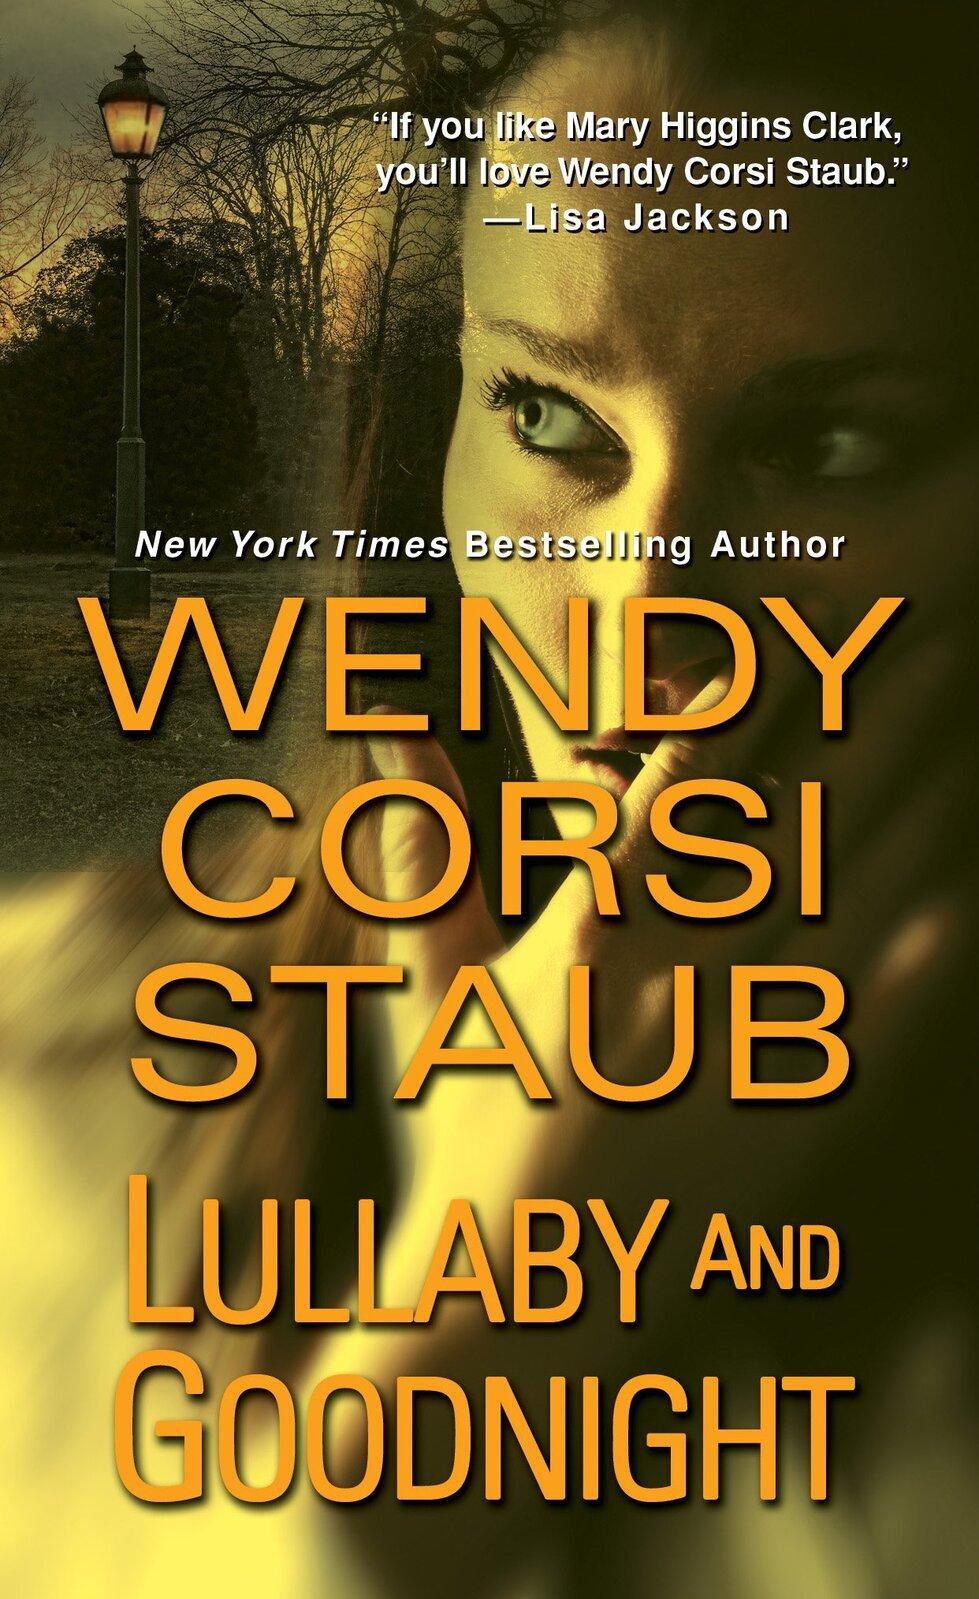 Lullaby and Goodnight Wendy Corsi Staub Paperback Novel Book